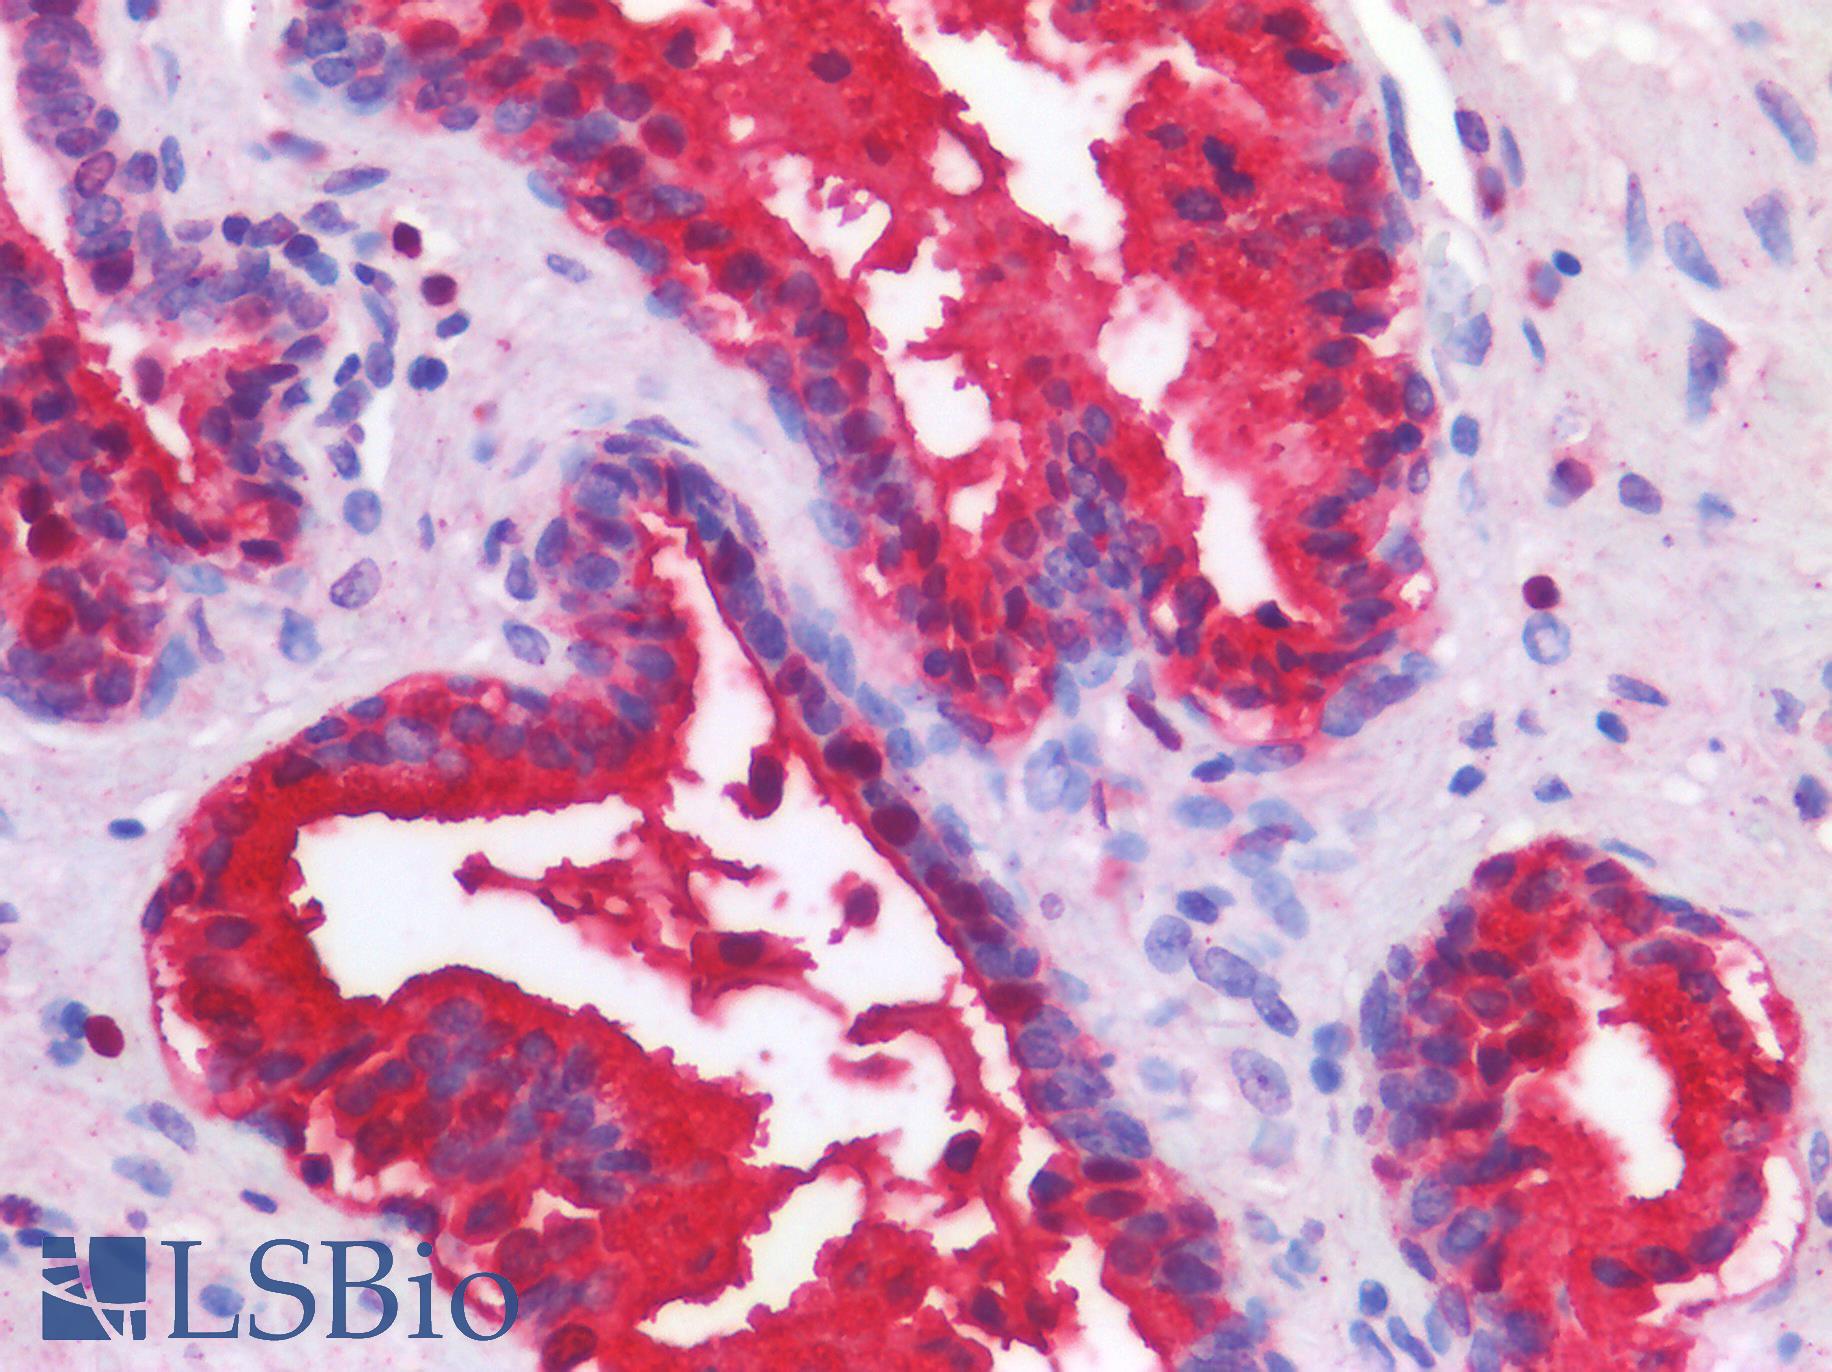 TP63 / p63 Antibody - Human Prostate: Formalin-Fixed, Paraffin-Embedded (FFPE)